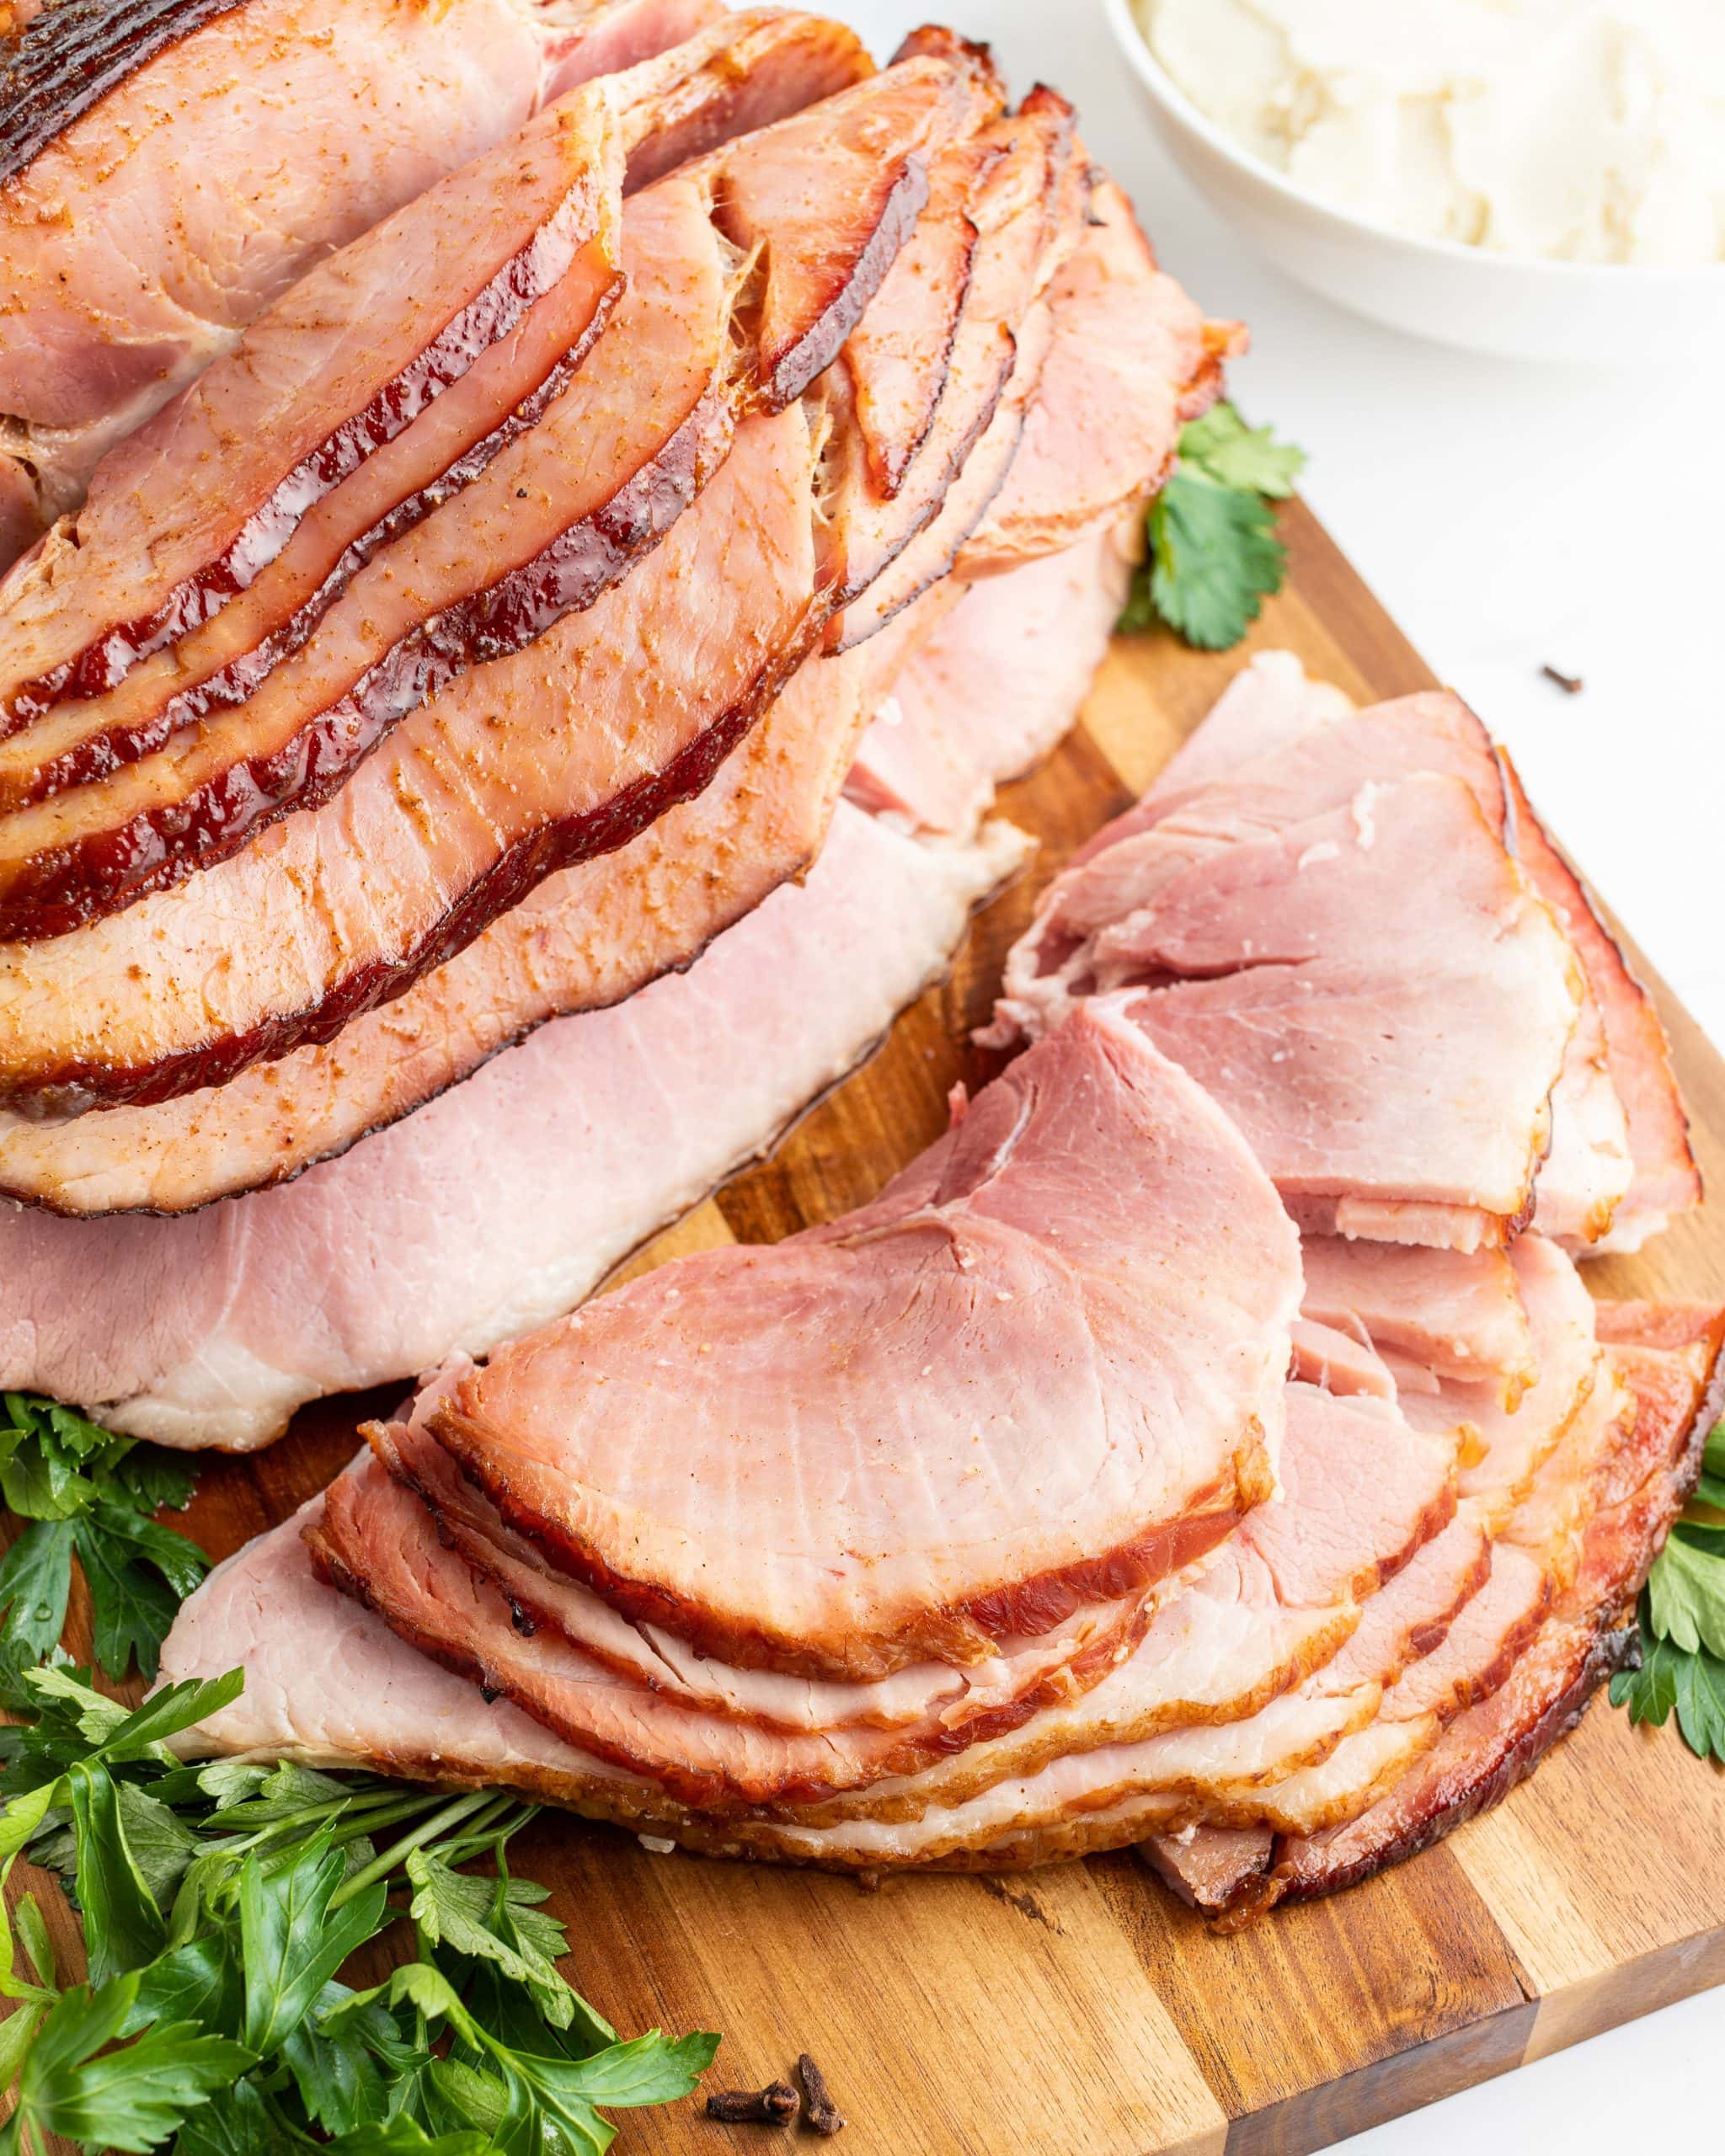 An overhead shot of a maple glazed ham on a cutting board, some of the pieces are cut off and laying in front of the ham on the board.